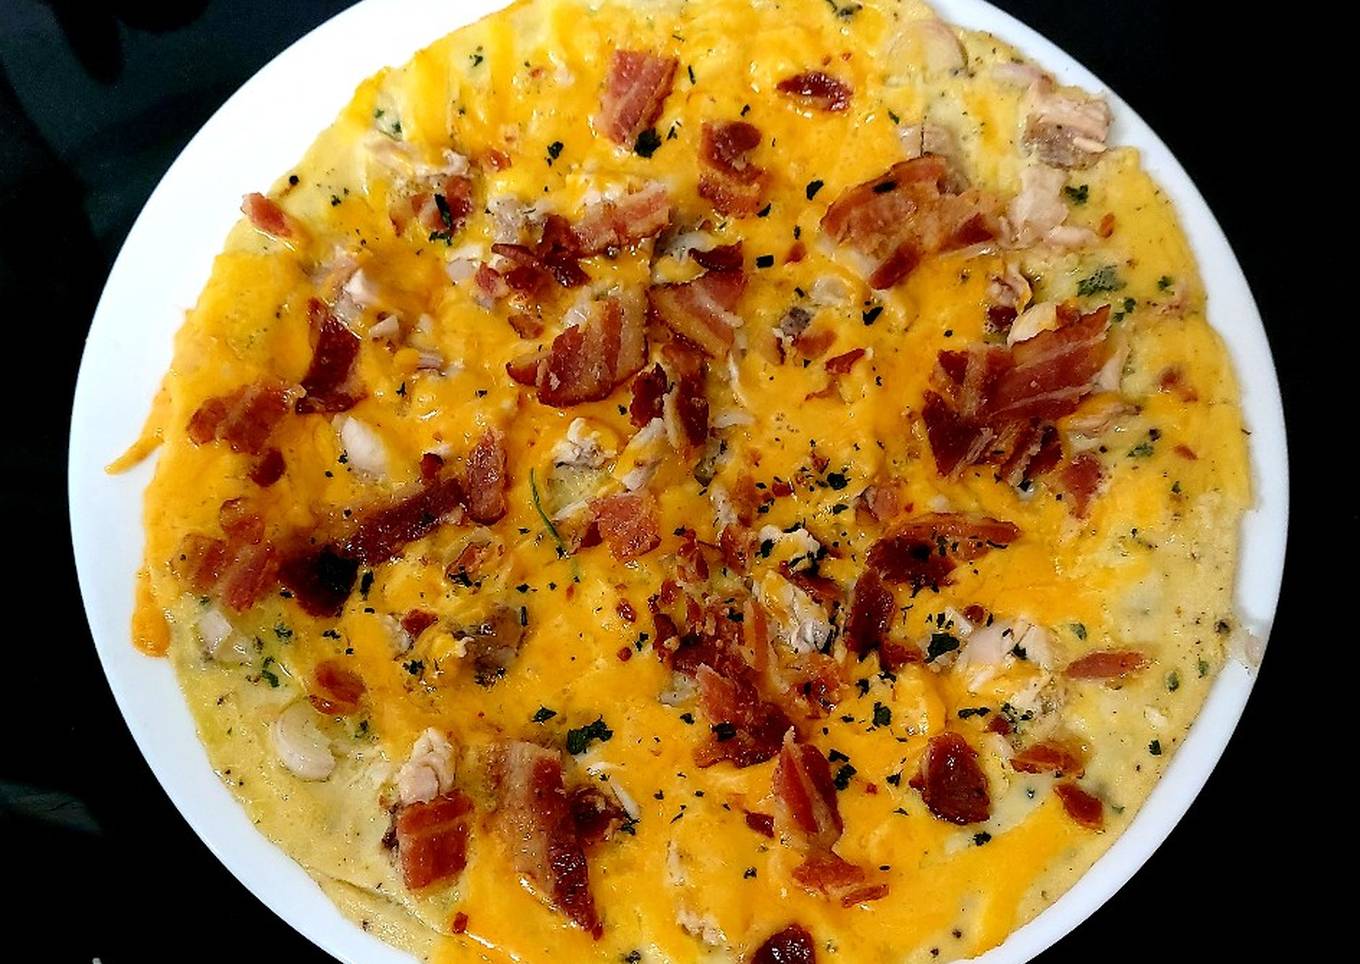 My left Over Chicken,Bacon & Cheese Omelette 🤩